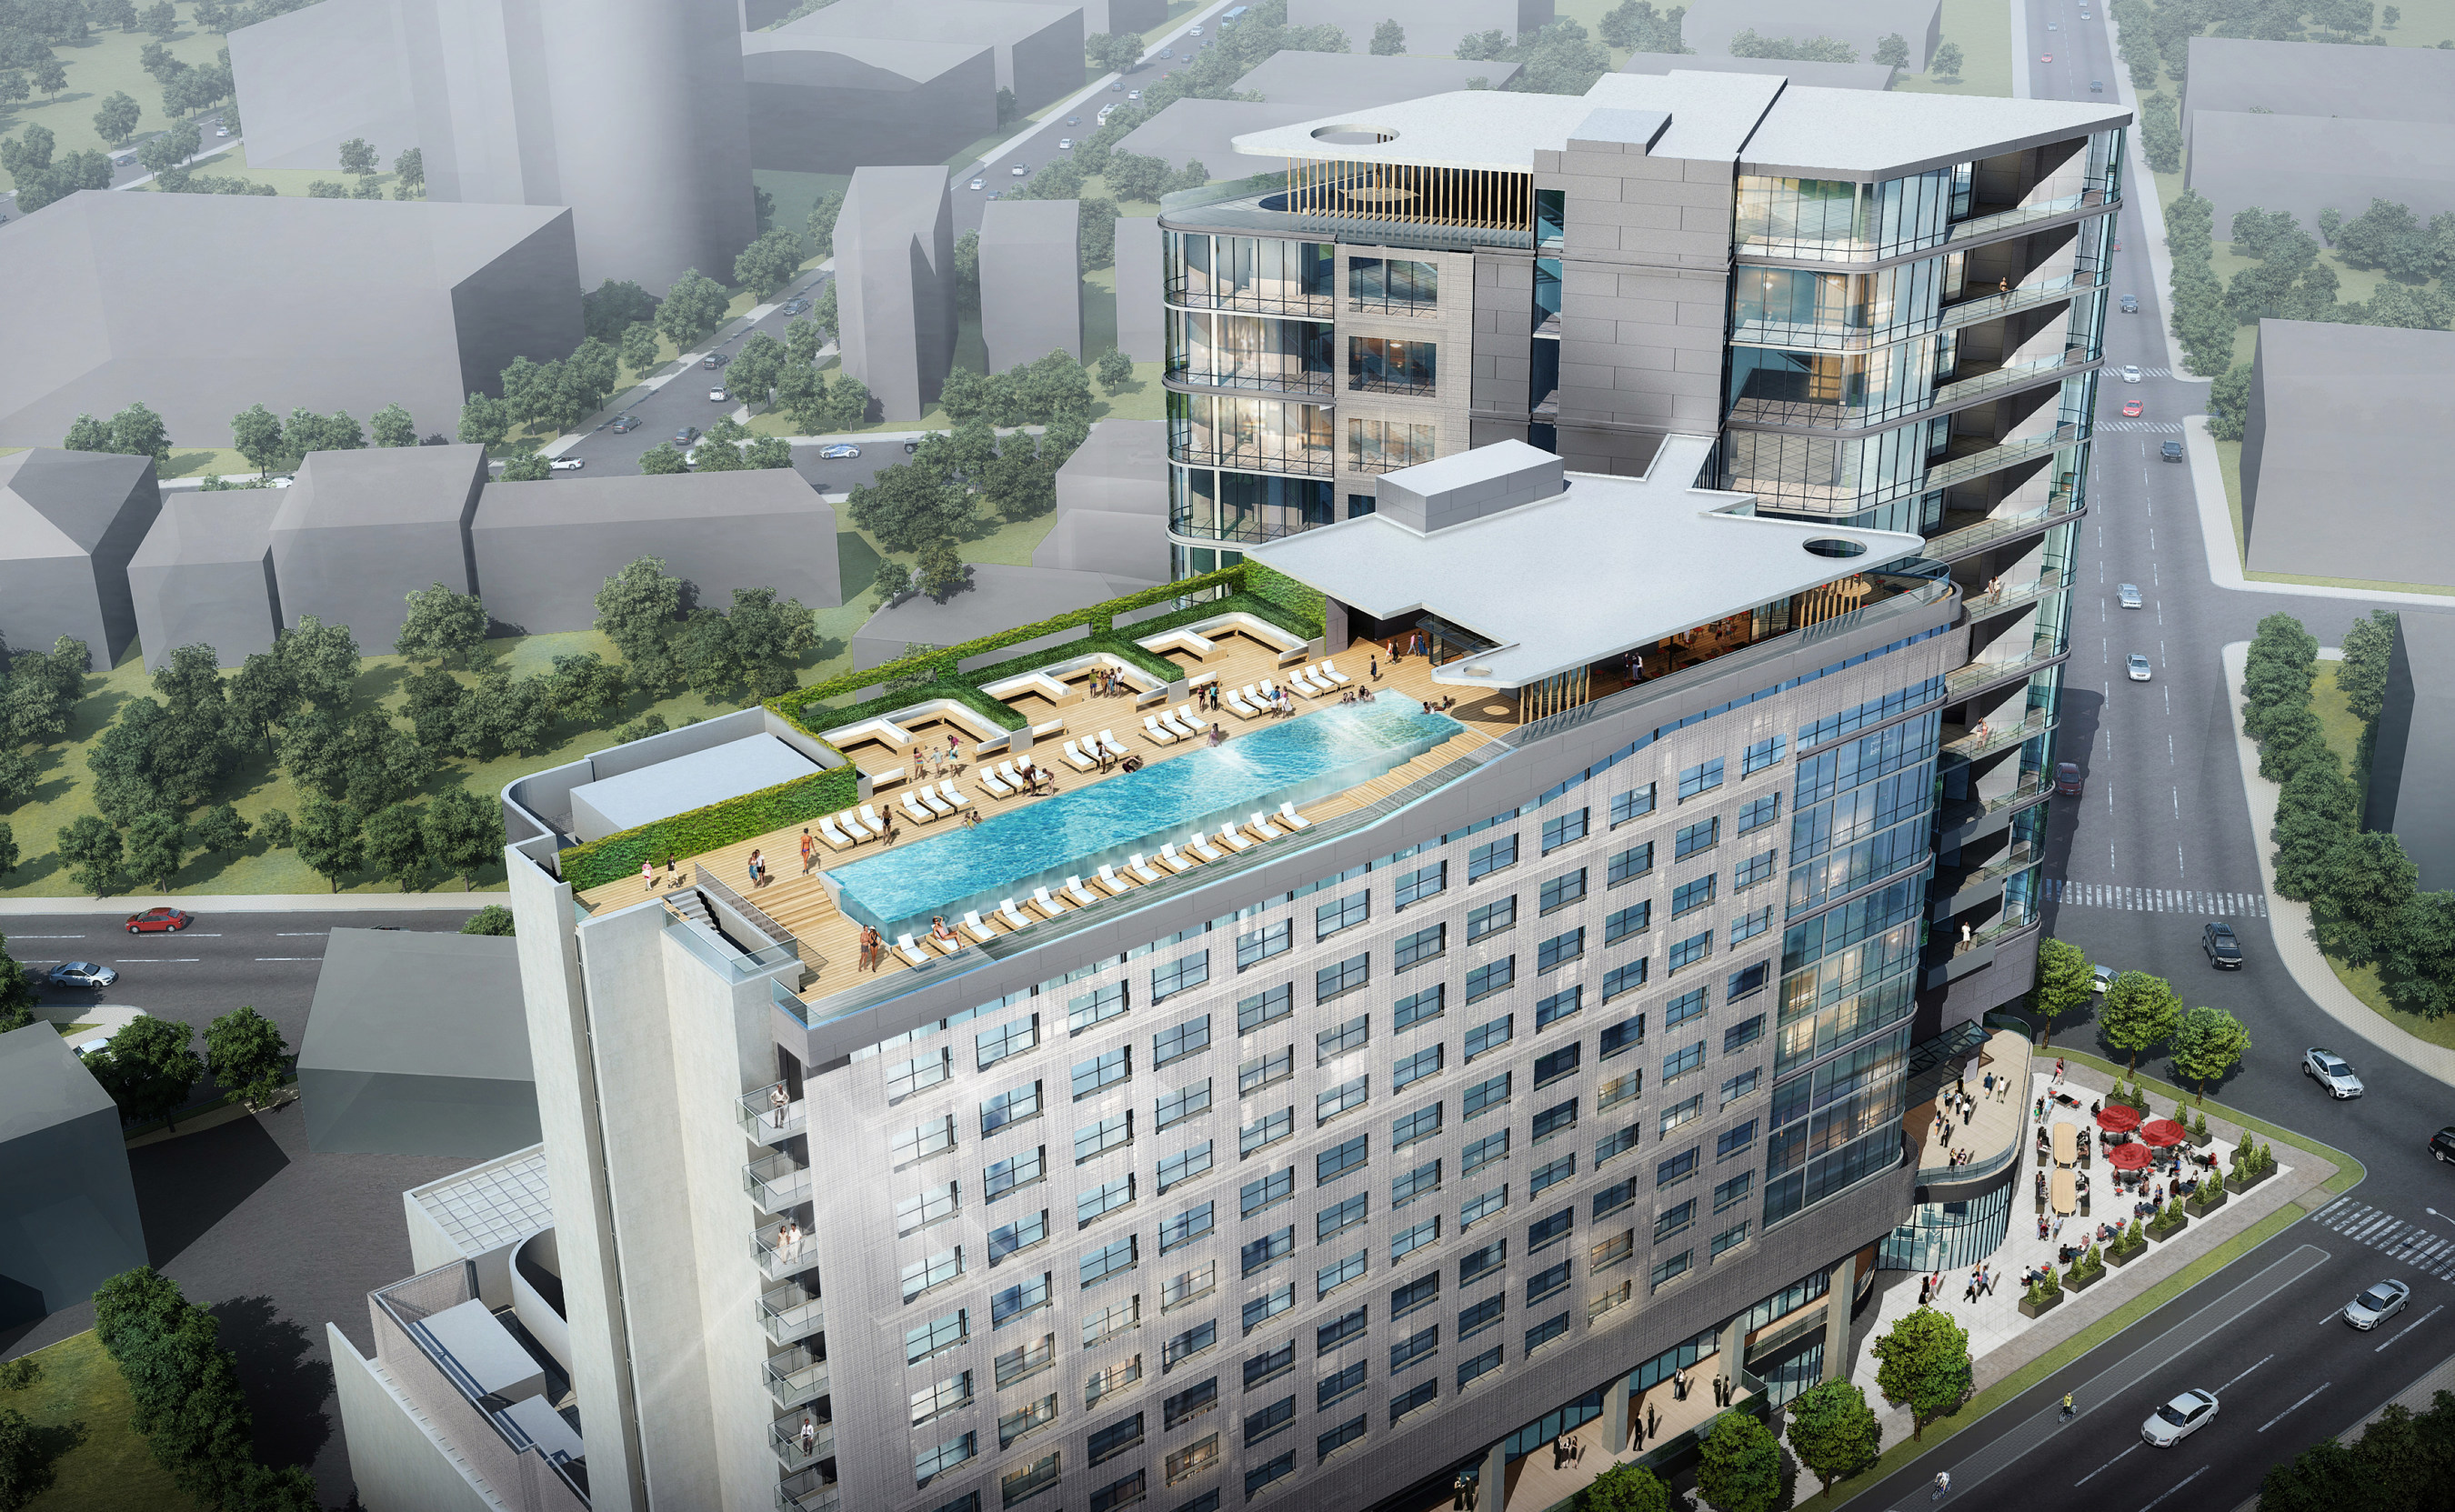 Virgin Hotels reveals its Nashville building designs with local ownership and developer Dean Chase of Construction Management firm D.F. Chase Inc., and architecture firm, BLUR Workshop. Virgin Hotels Nashville, expected to open in the fall of 2016, will be located at the start of the city's historic and nationally recognized Music Row, with the address One Music Row. The first Virgin Hotels property opened January 15, 2015 in Chicago.